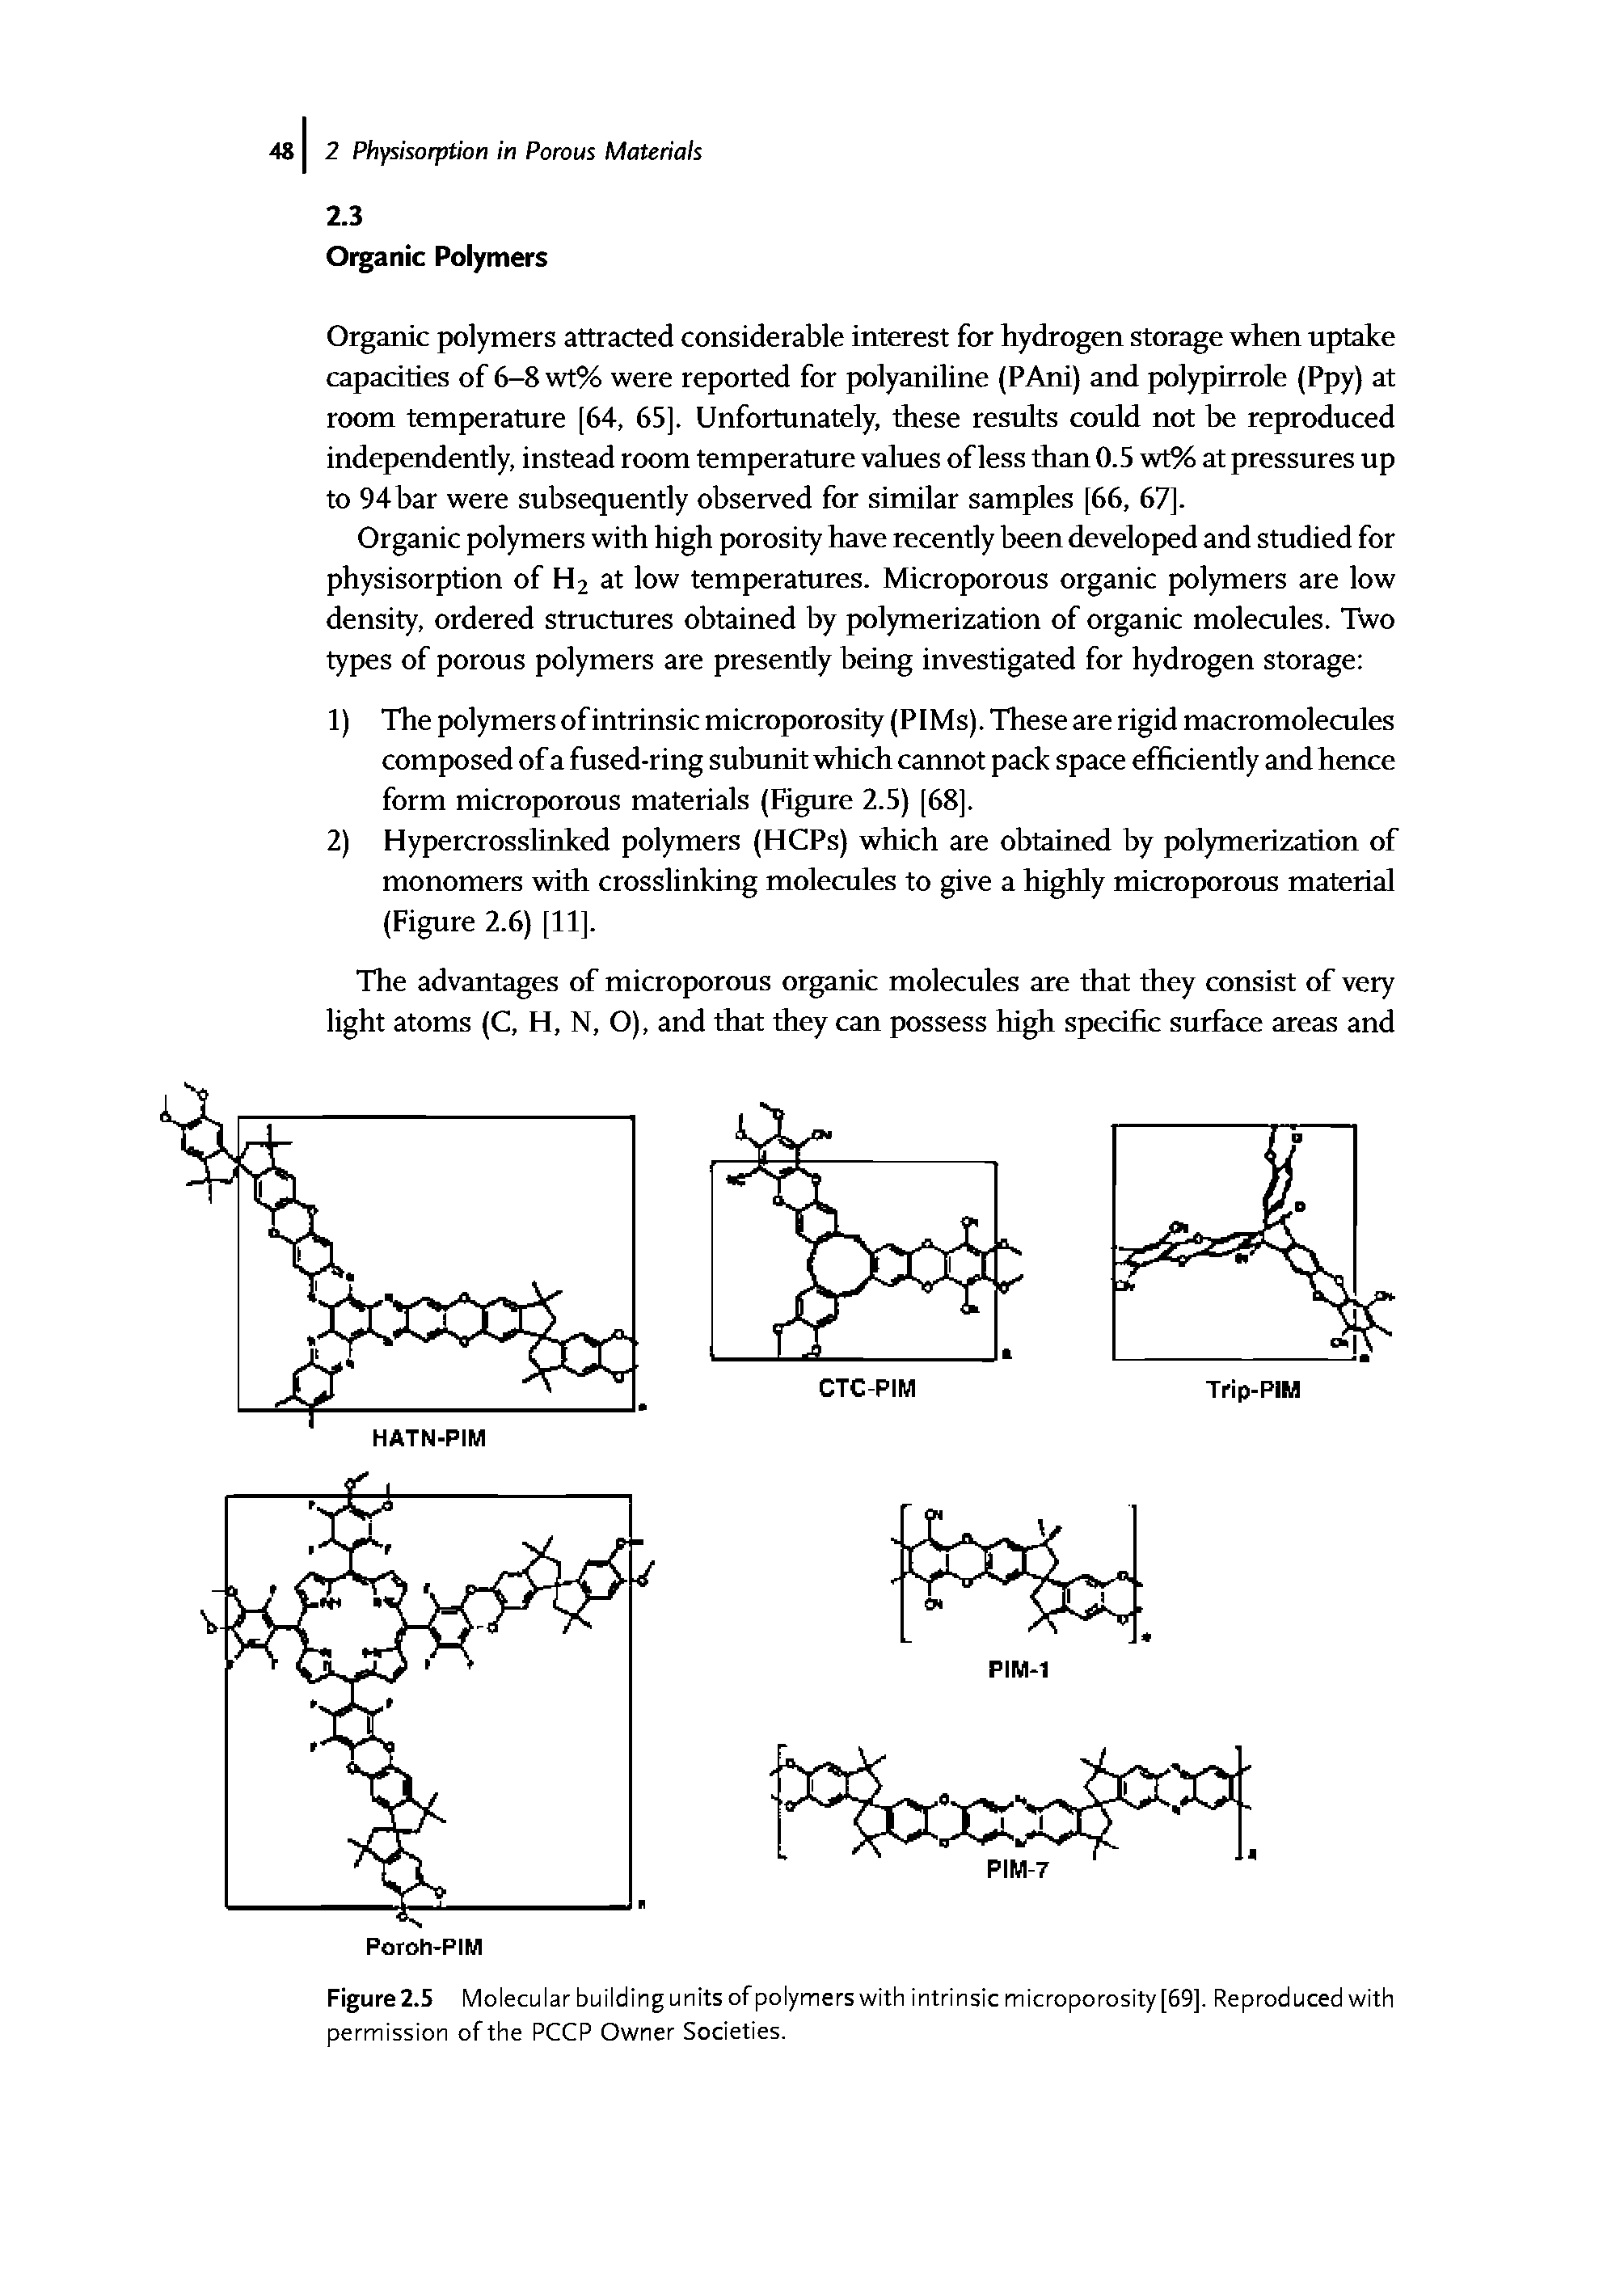 Figure 2.5 Molecular building units of polymers with intrinsic microporosity [69]. Reproduced with permission of the PCCP Owner Societies.